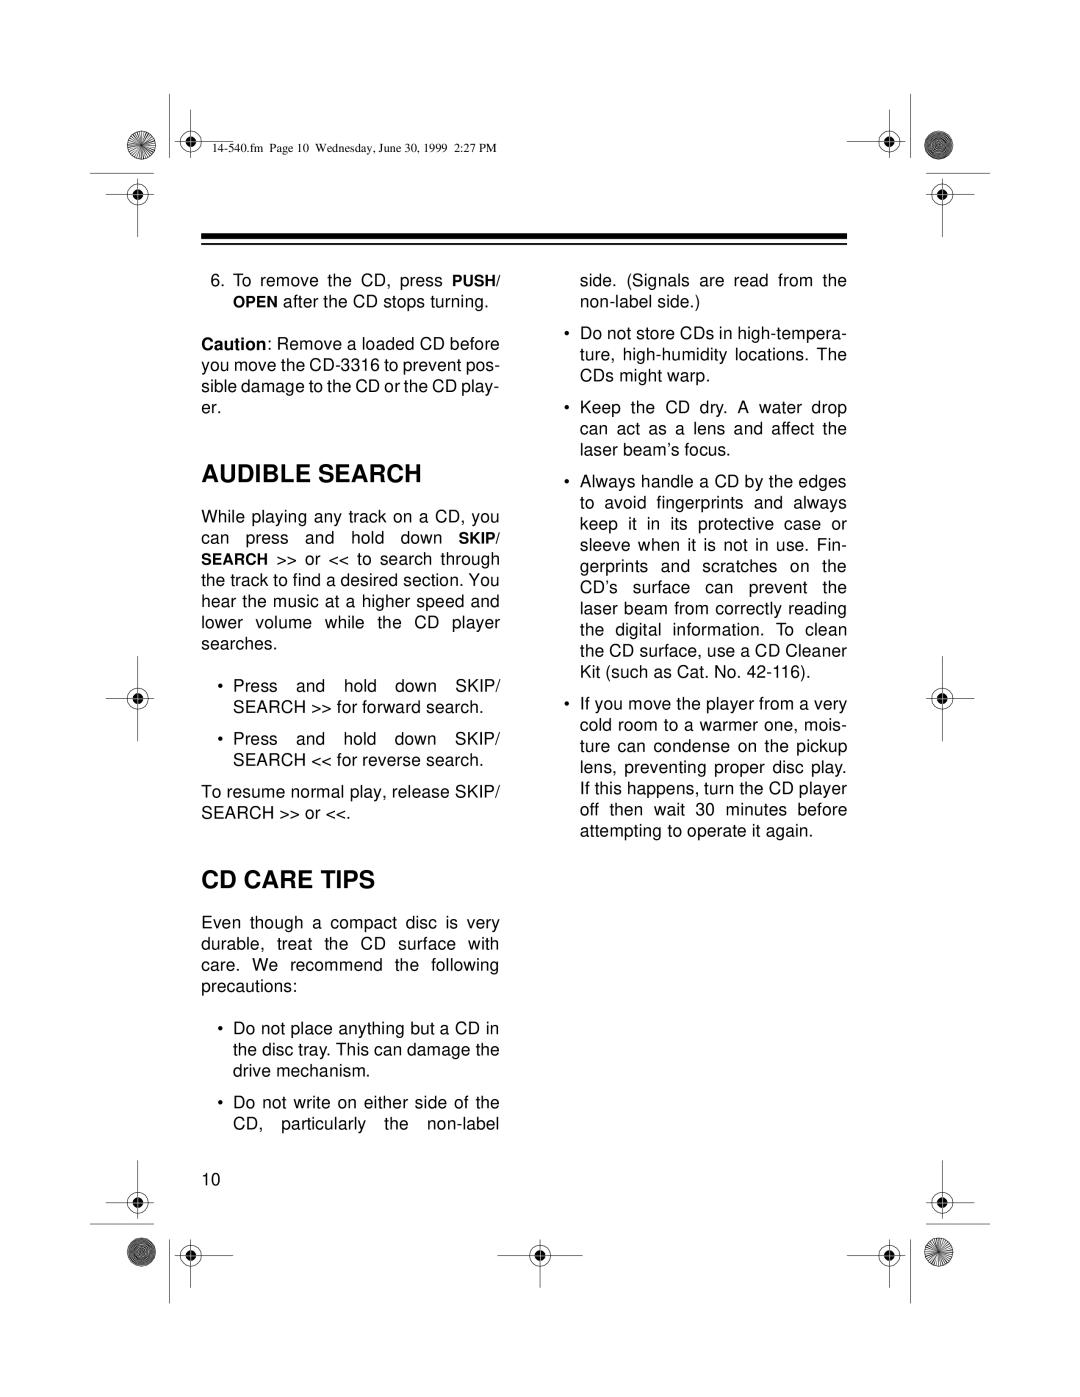 Radio Shack CD-3316 owner manual Audible Search, CD Care Tips 